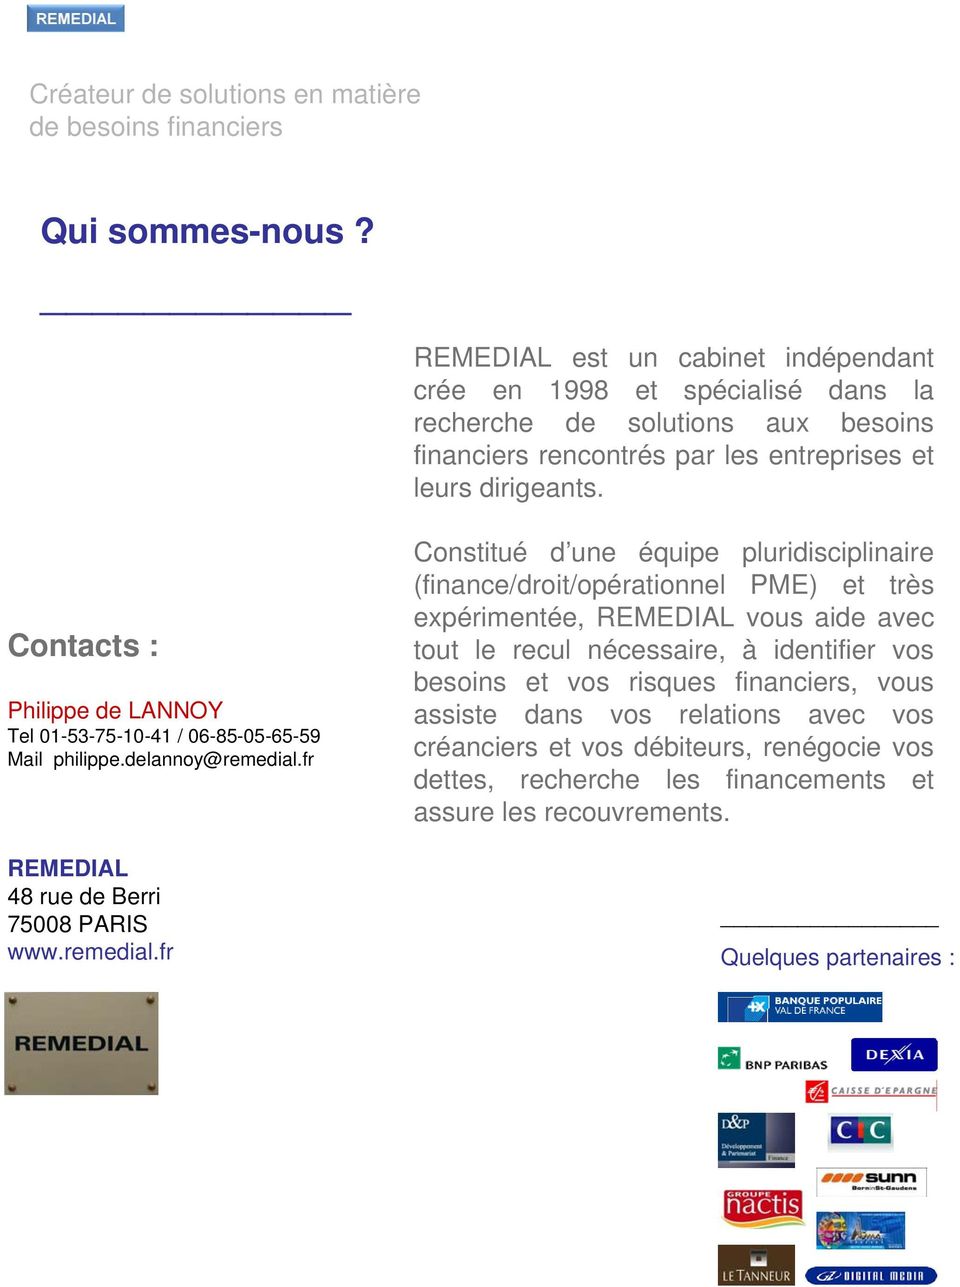 Contacts : Philippe de LANNOY Tel 01-53-75-10-41 / 06-85-05-65-59 Mail philippe.delannoy@remedial.